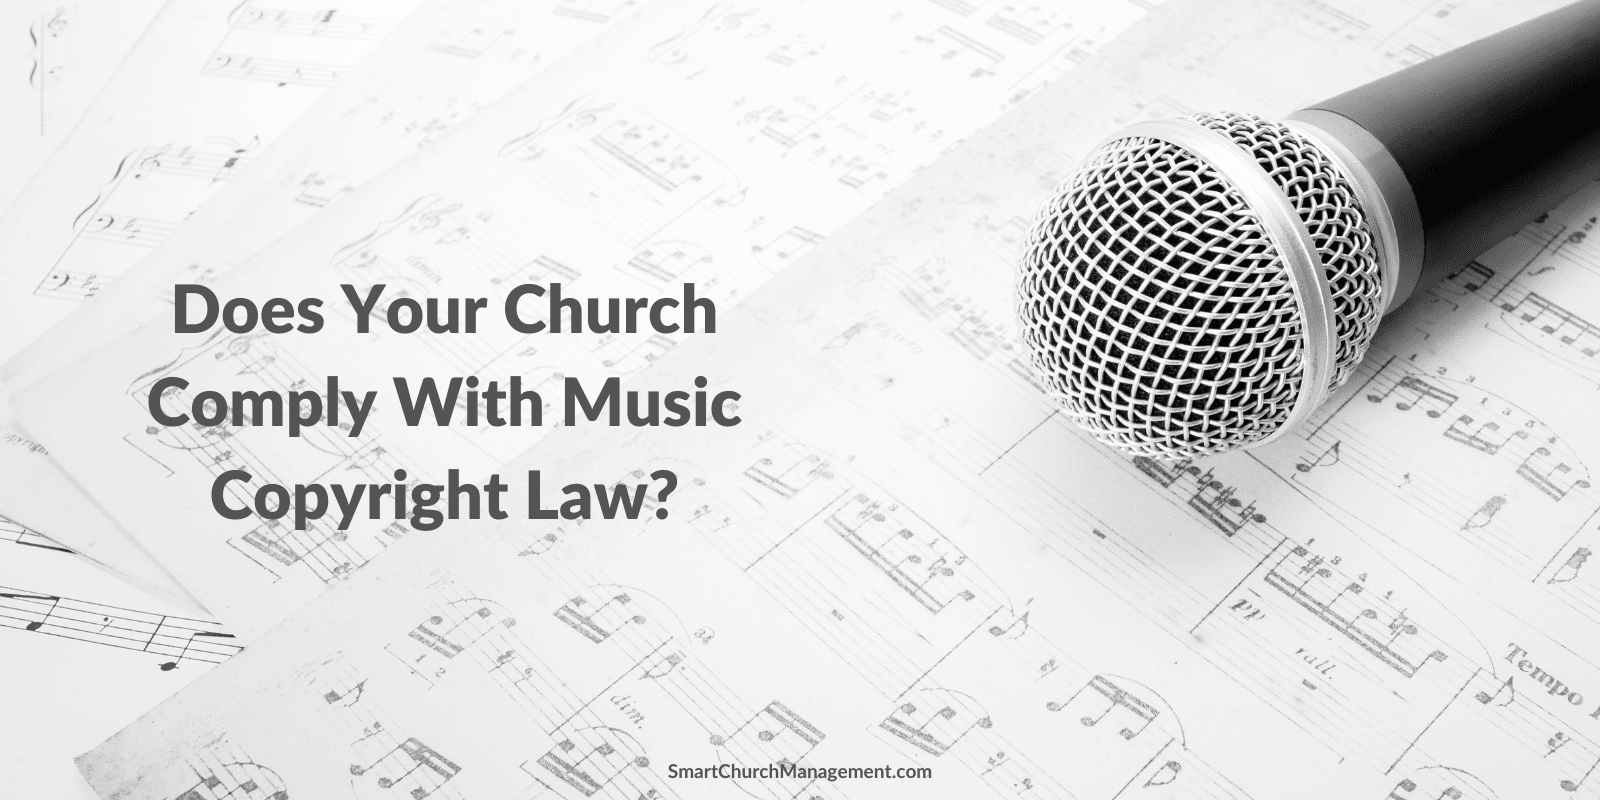 Copyright Laws for churches - how to comply